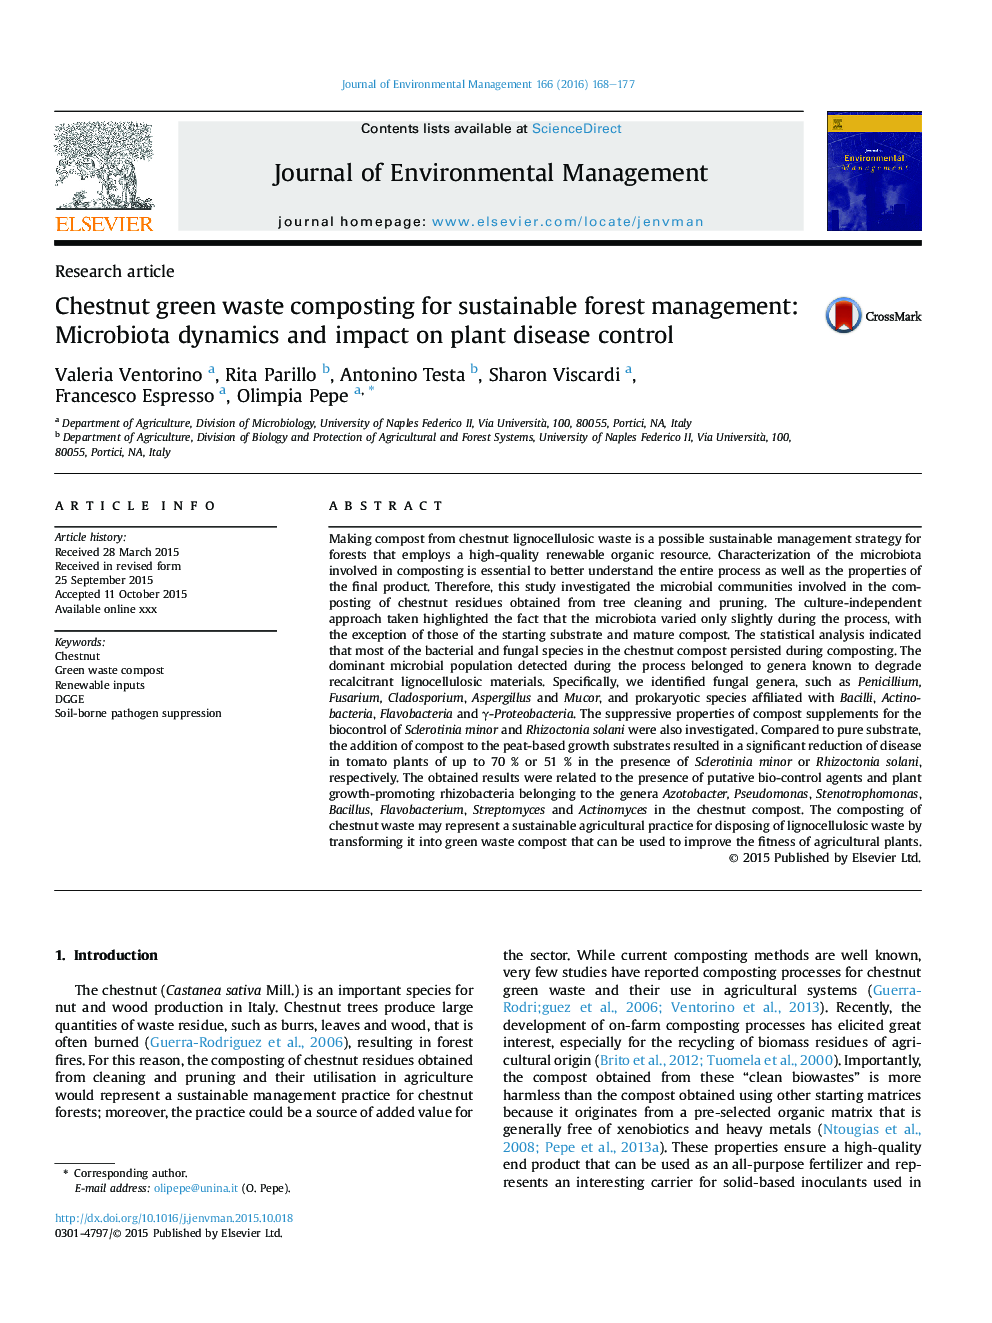 Chestnut green waste composting for sustainable forest management: Microbiota dynamics and impact on plant disease control